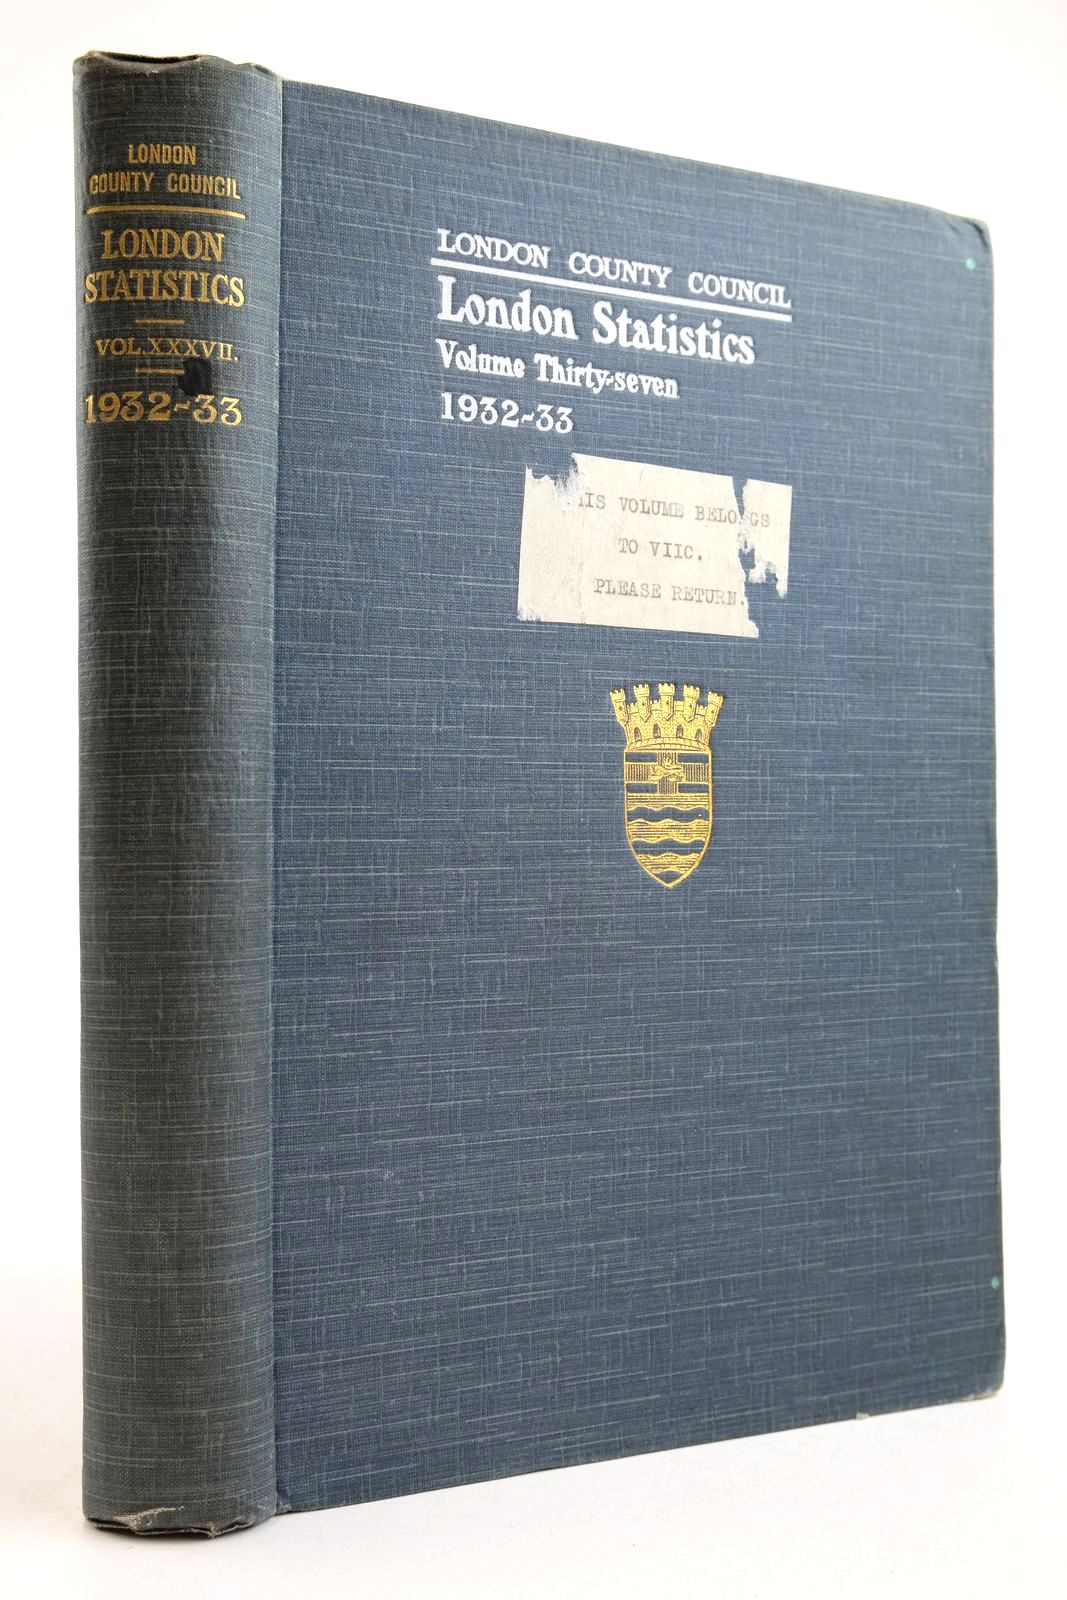 Photo of LONDON STATISTICS 1932-33 VOL. XXXVII published by London County Council (STOCK CODE: 2134150)  for sale by Stella & Rose's Books